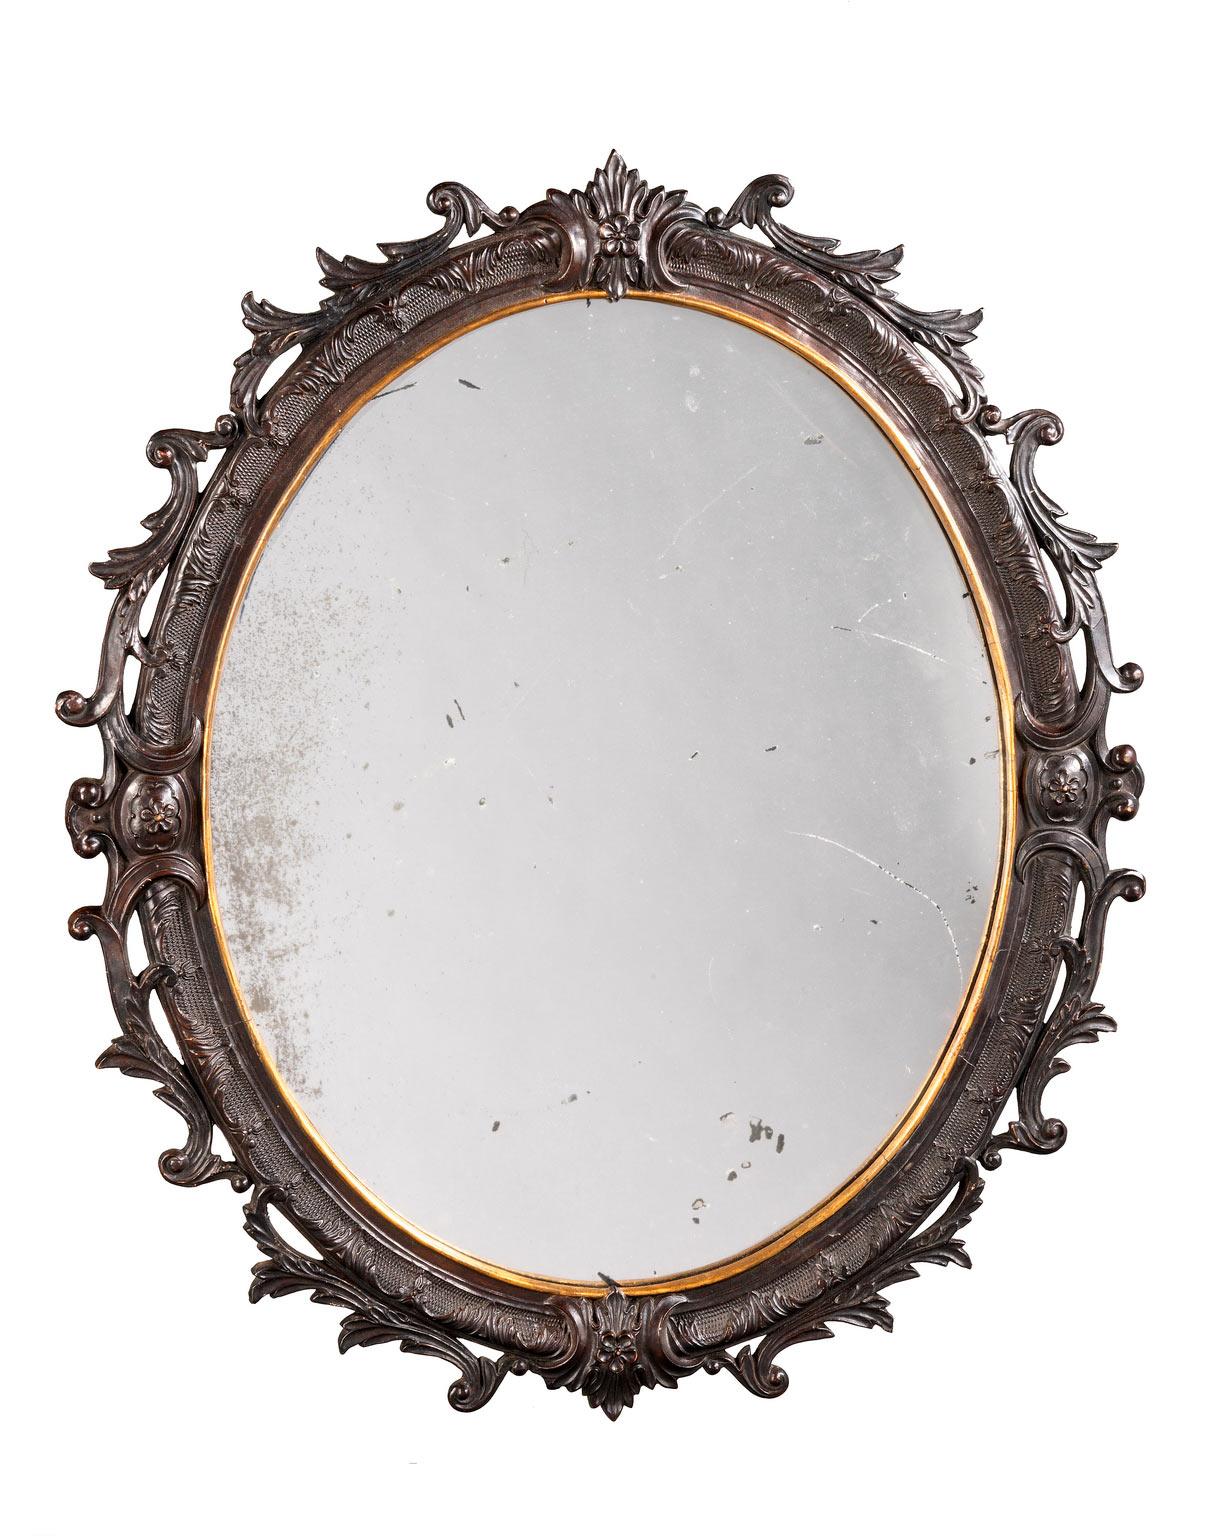 Late 18th Century Mahogany Mirror In Excellent Condition For Sale In Peterborough, Northamptonshire